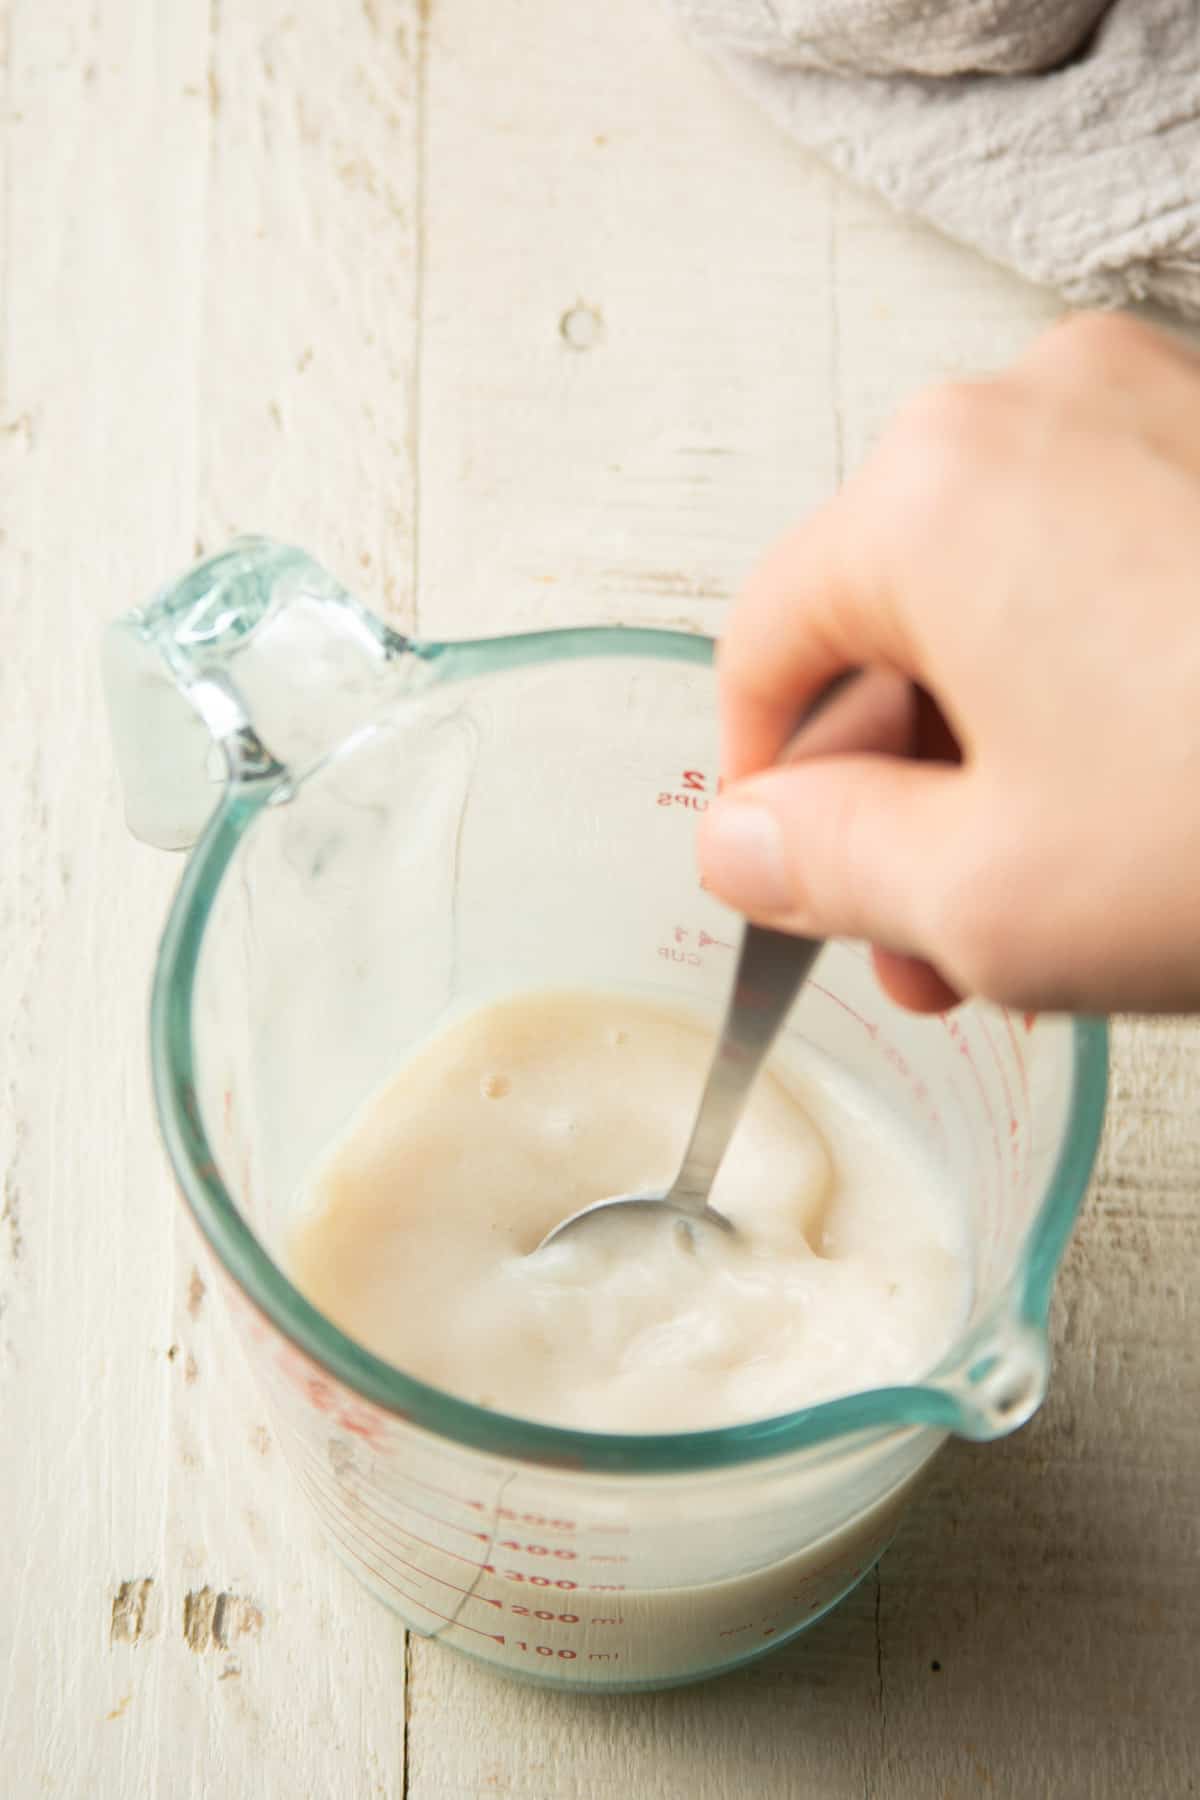 Hand stirring liquid ingredients for cake batter together in a liquid measuring cup.